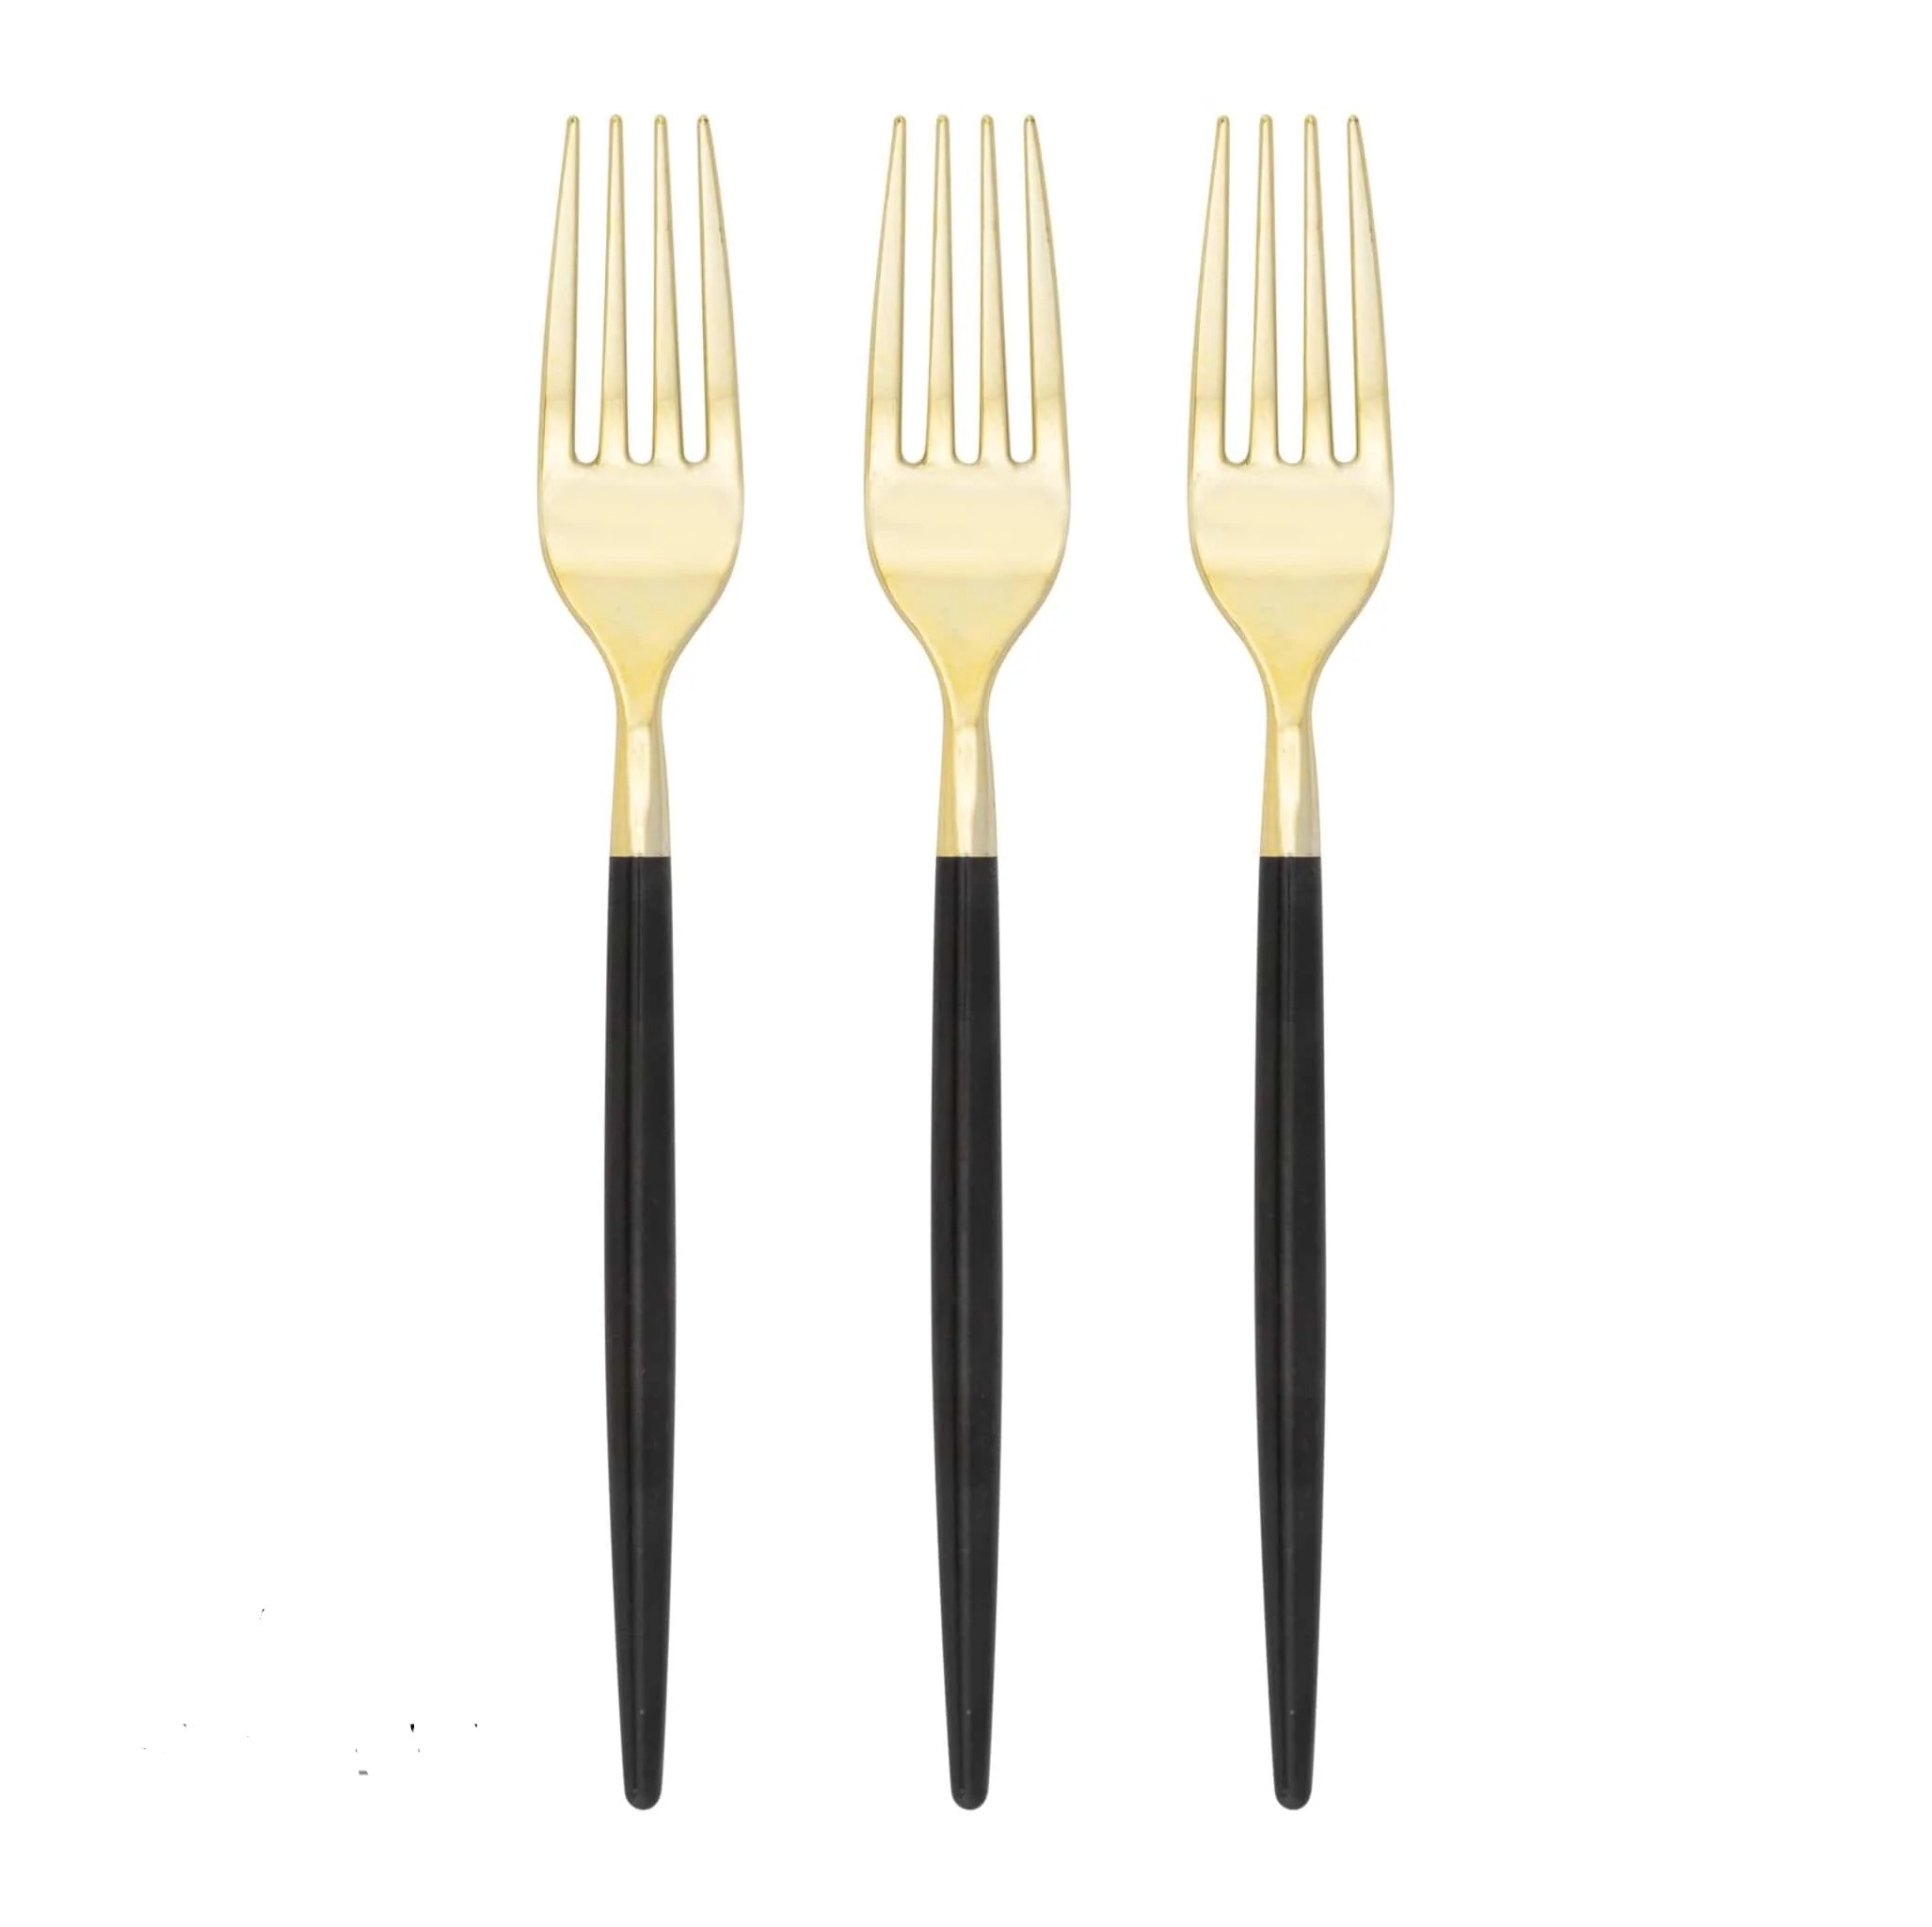 Luxe Party Chic Black and Gold Two Tone Plastic Forks - 32 pcs